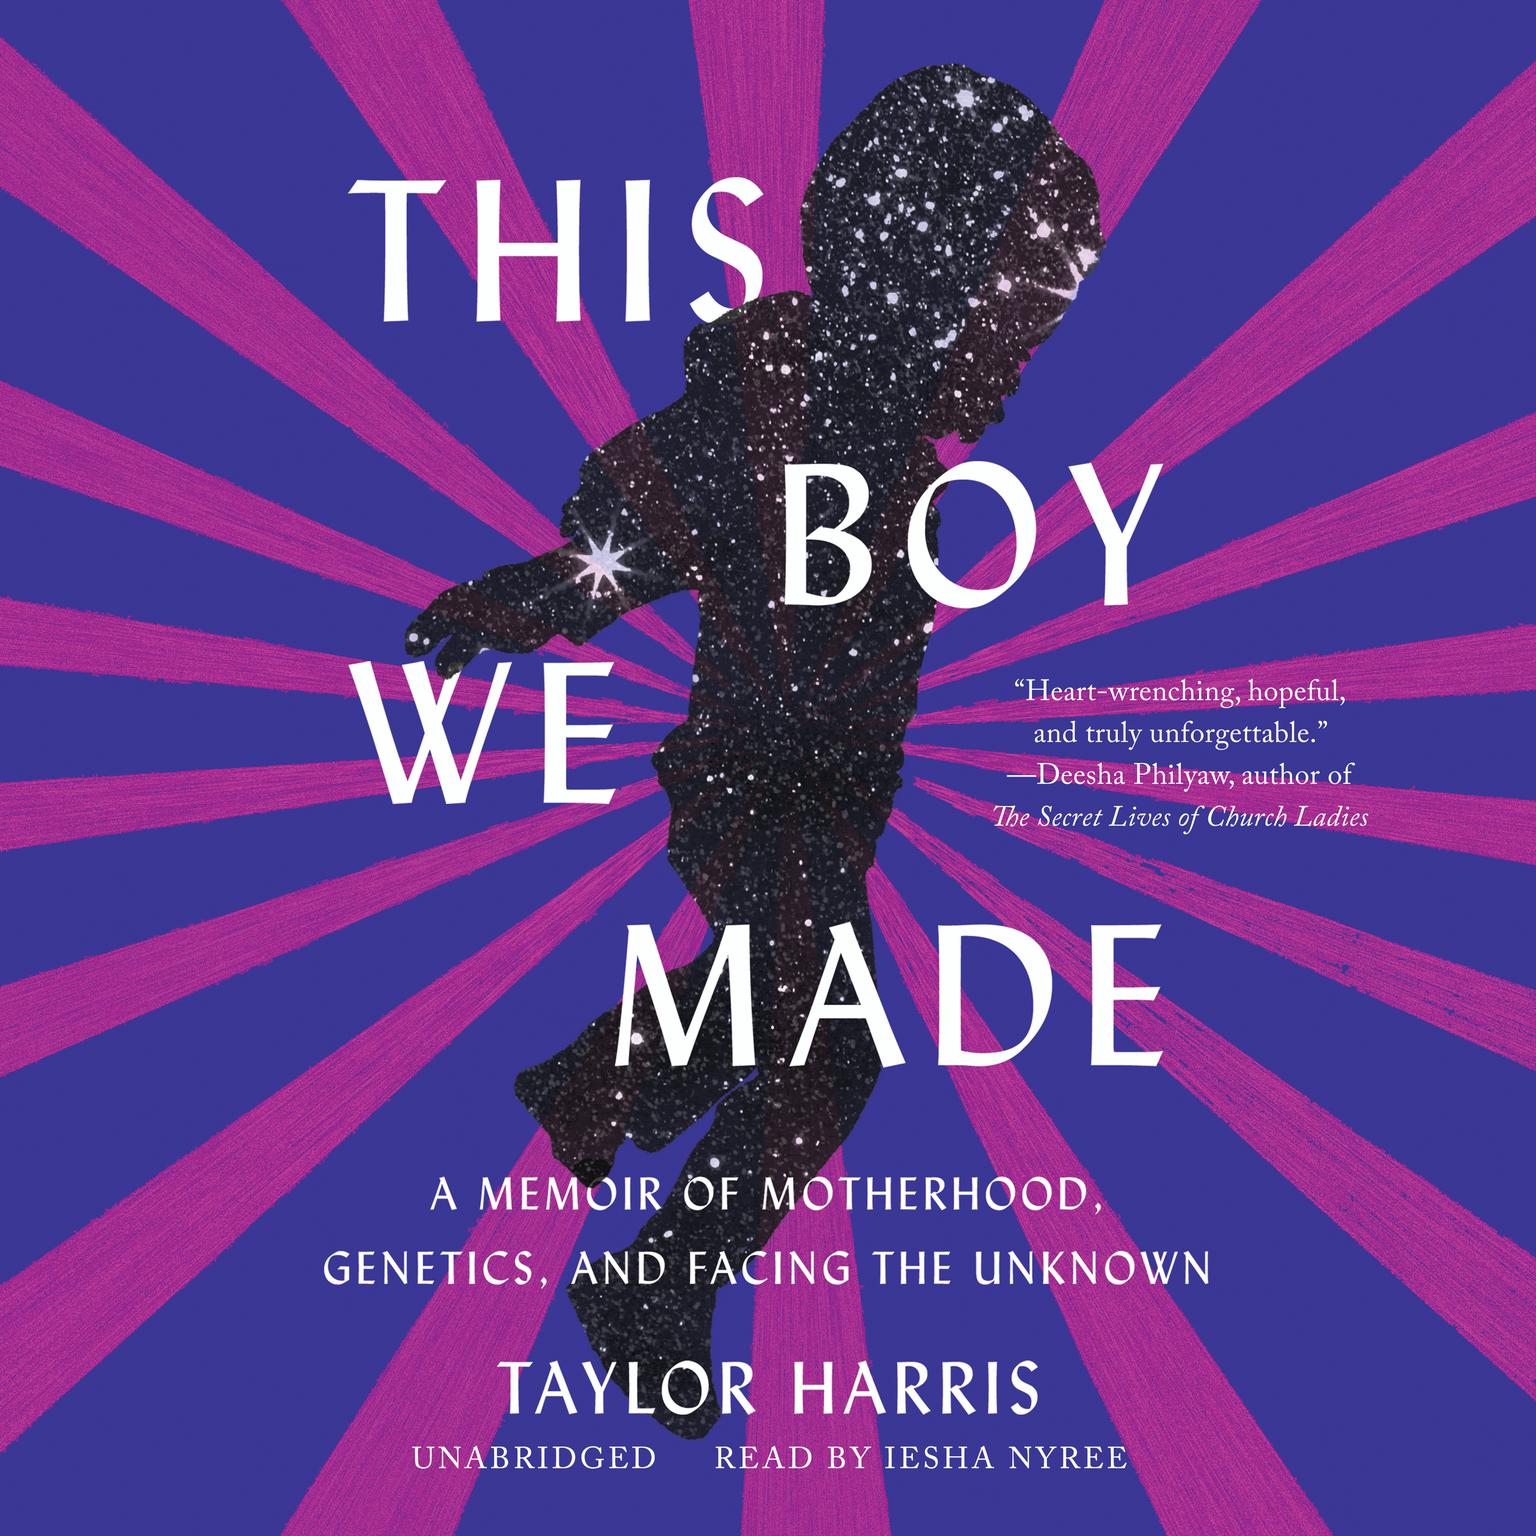 This Boy We Made: A Memoir of Motherhood, Genetics, and Facing the Unknown Audiobook, by Taylor Harris